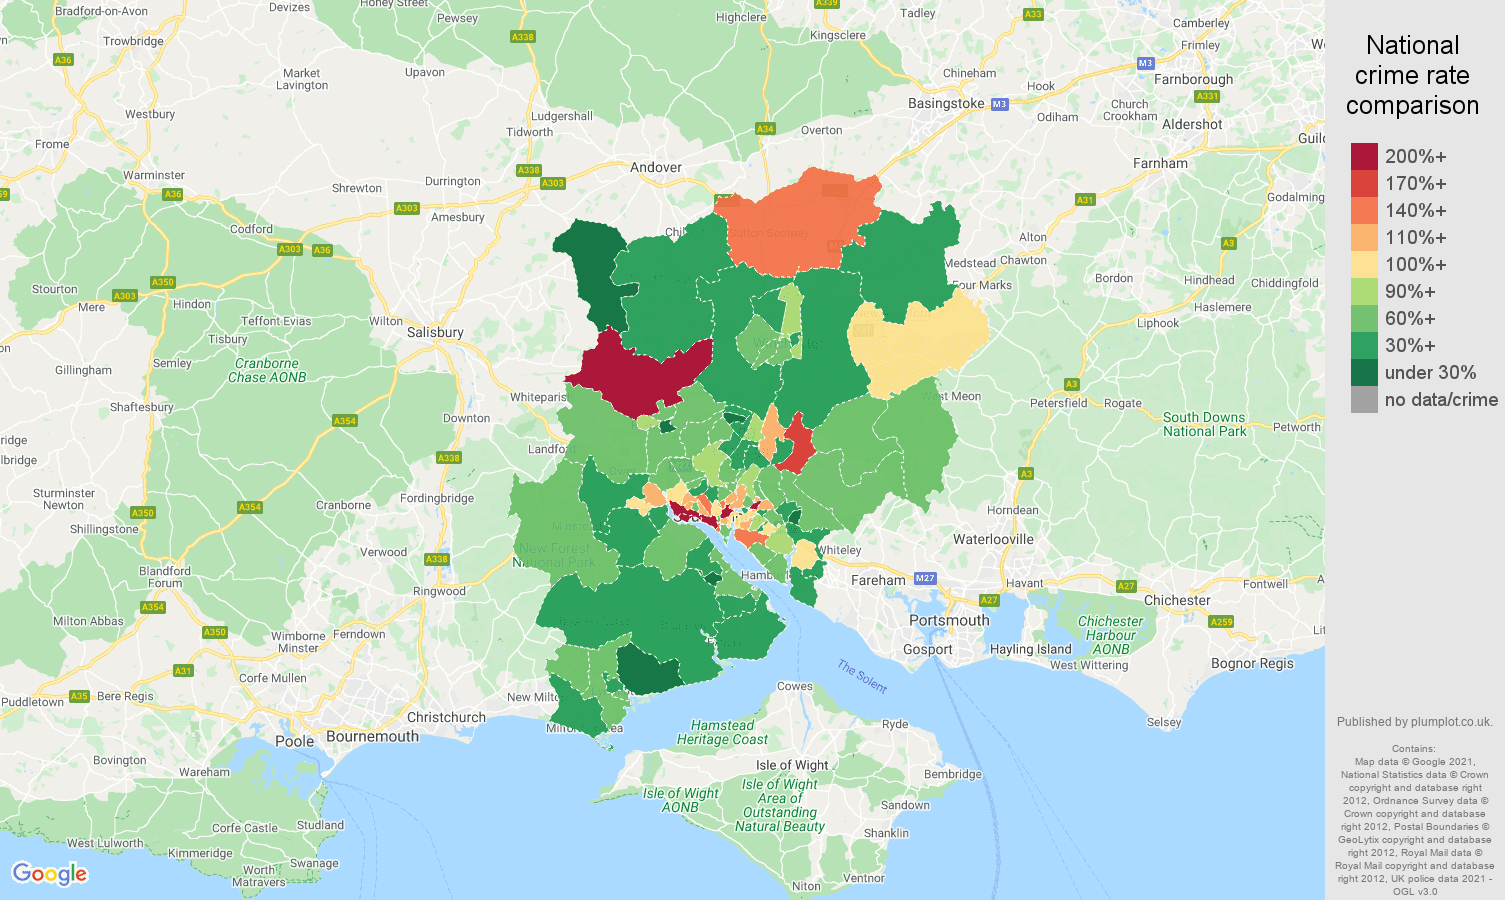 Southampton other theft crime rate comparison map